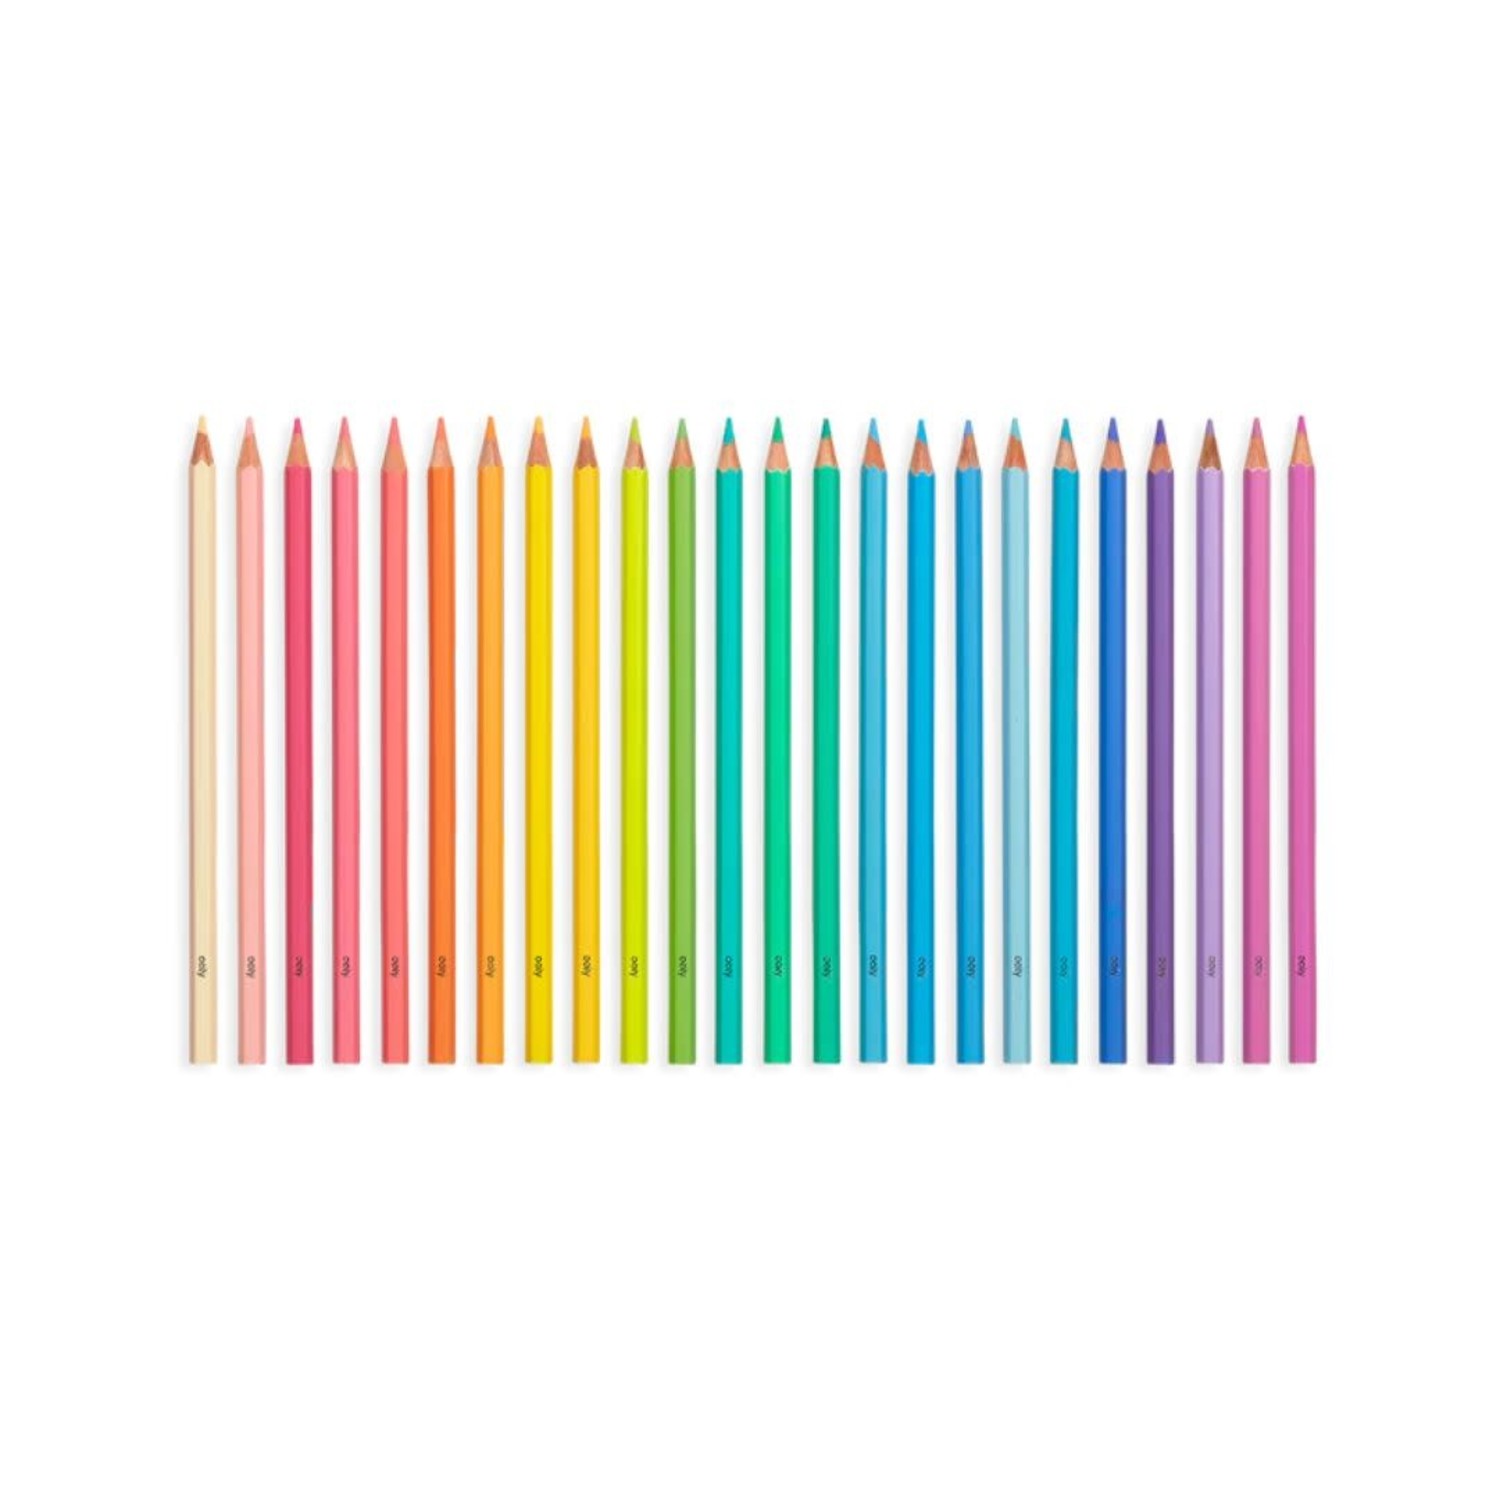 OOLY, Rainbow Doodlers Twist-Up-colored pencils (36 pieces)